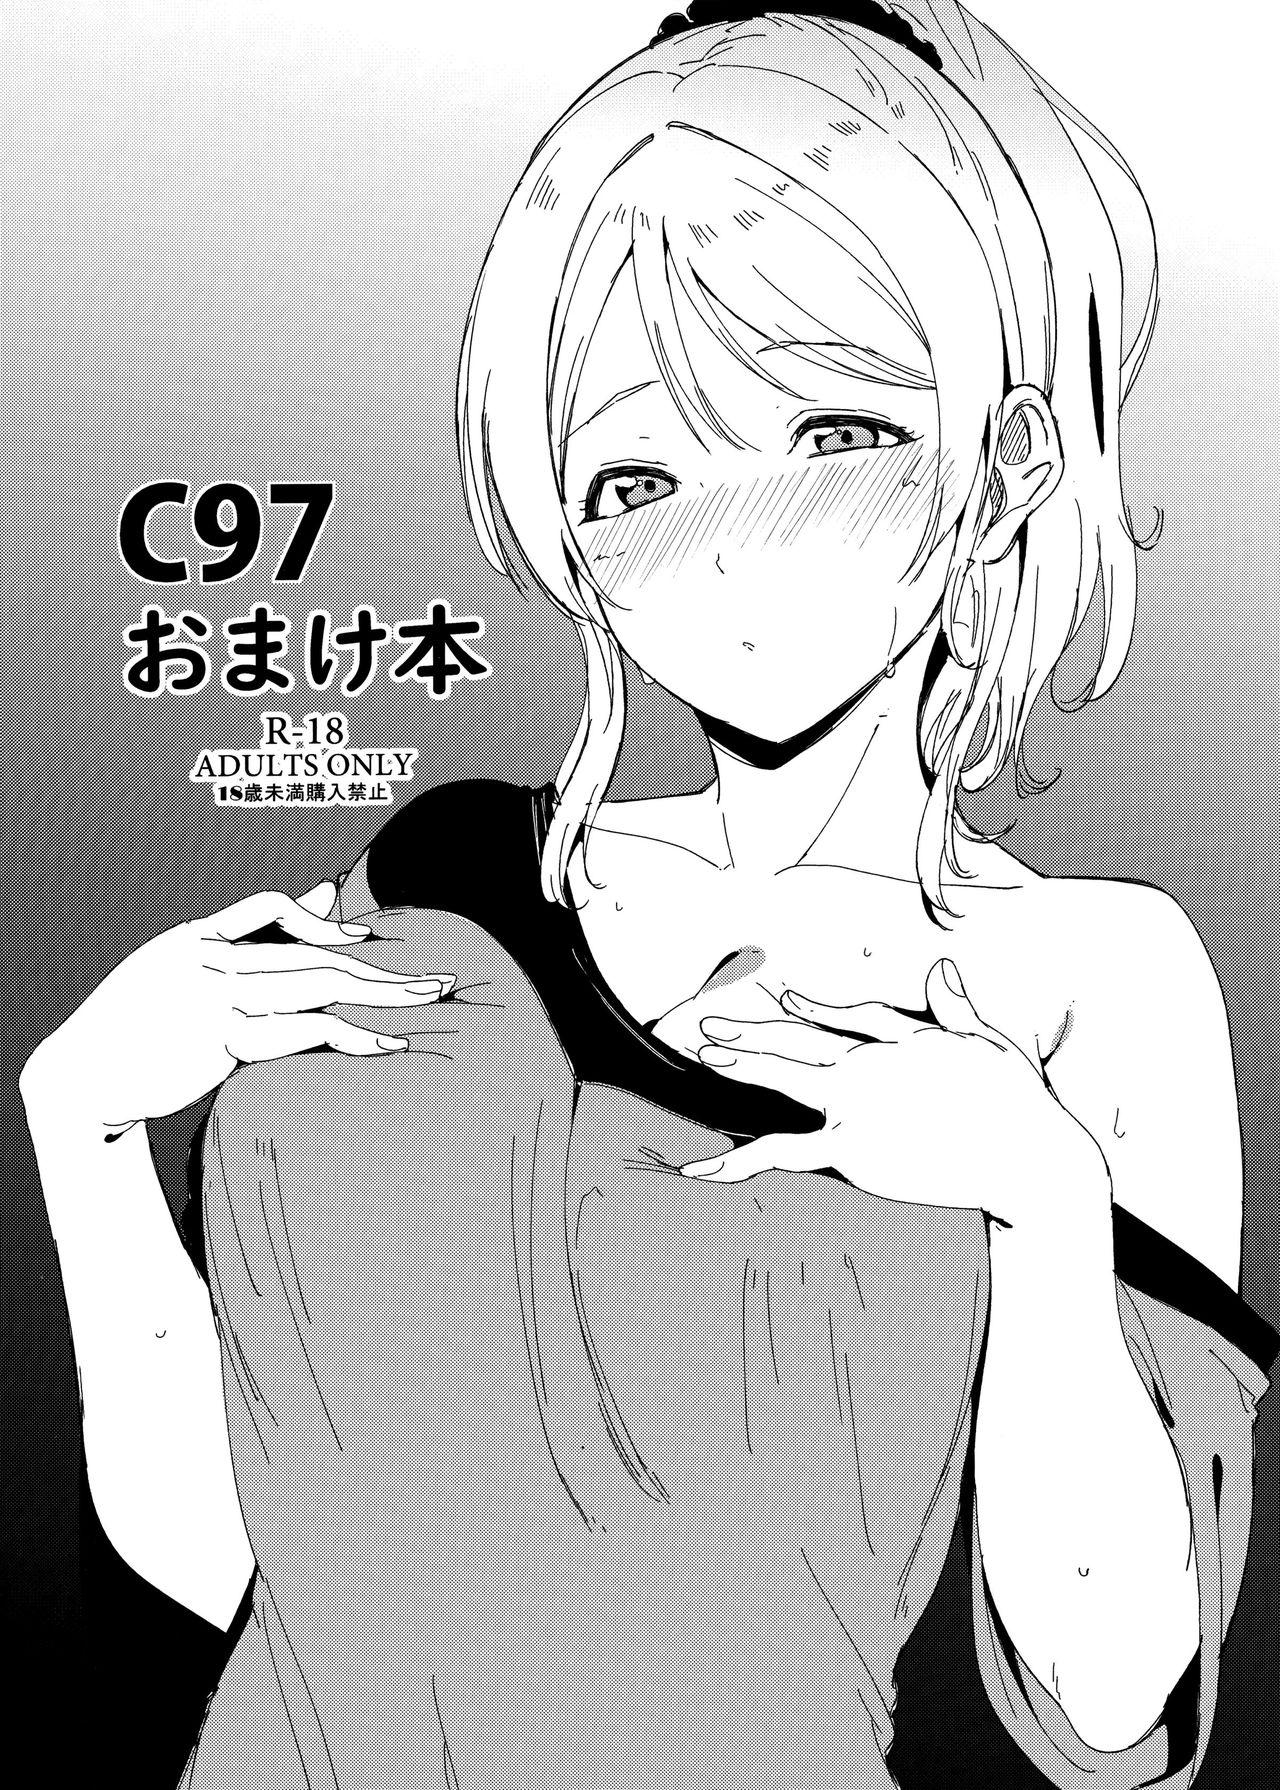 Butt Sex C97 Omakebon - Love live Amazing - Page 1